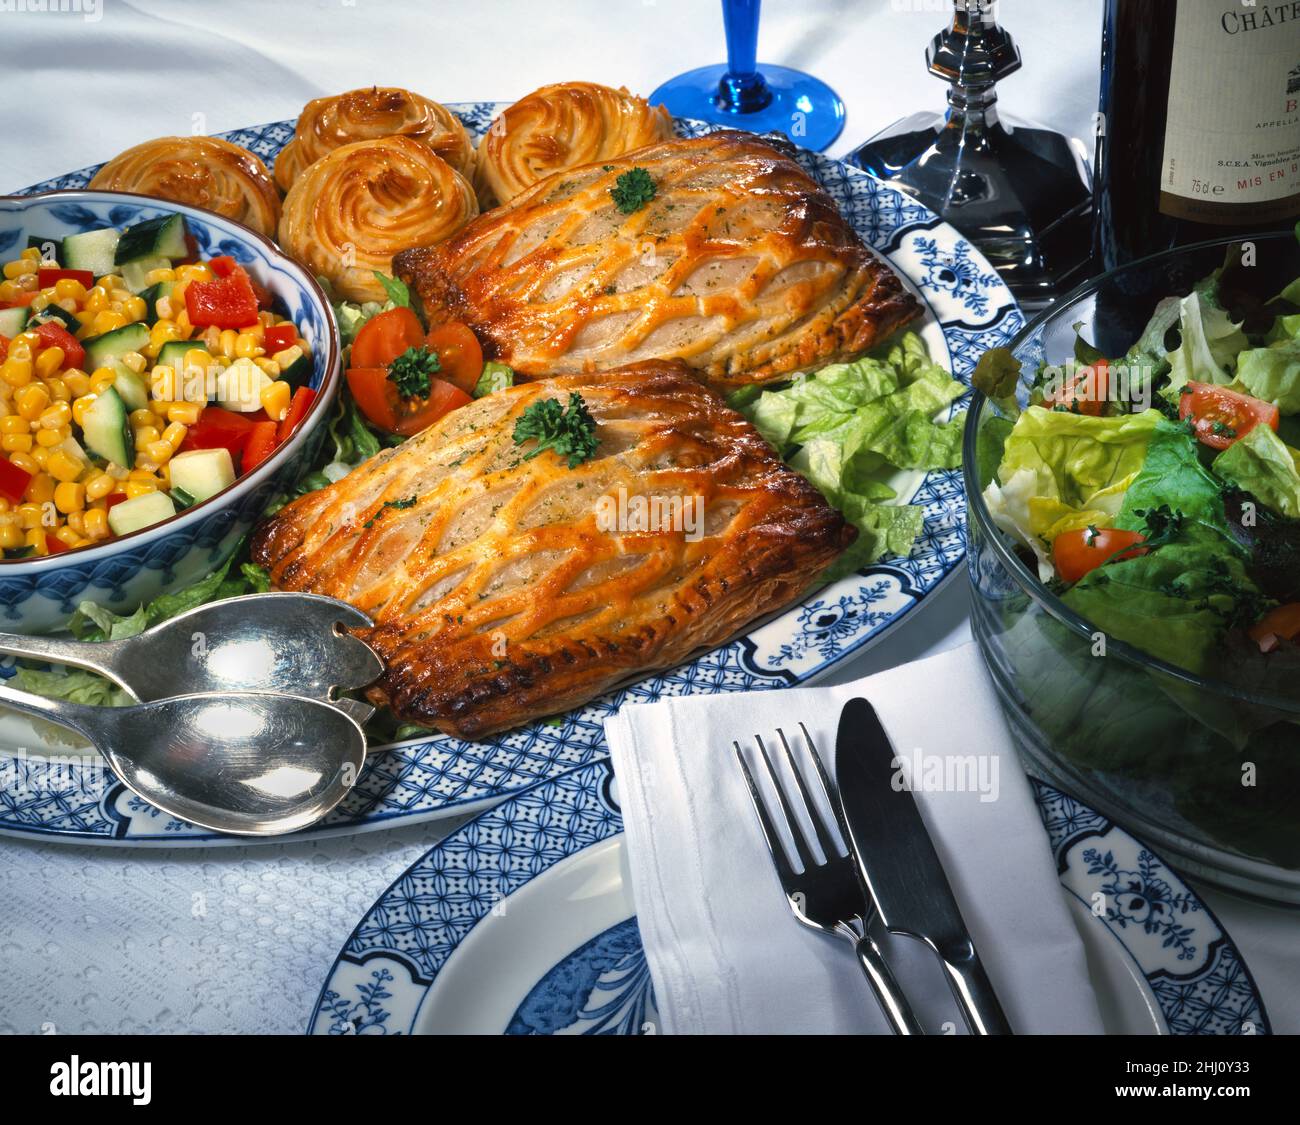 Two lattice topped slices on a blue & white plate bowl of salad sweetcorn cucumber, tomatoes, red peppers lettuce, parsley knife & fork white napkin Stock Photo